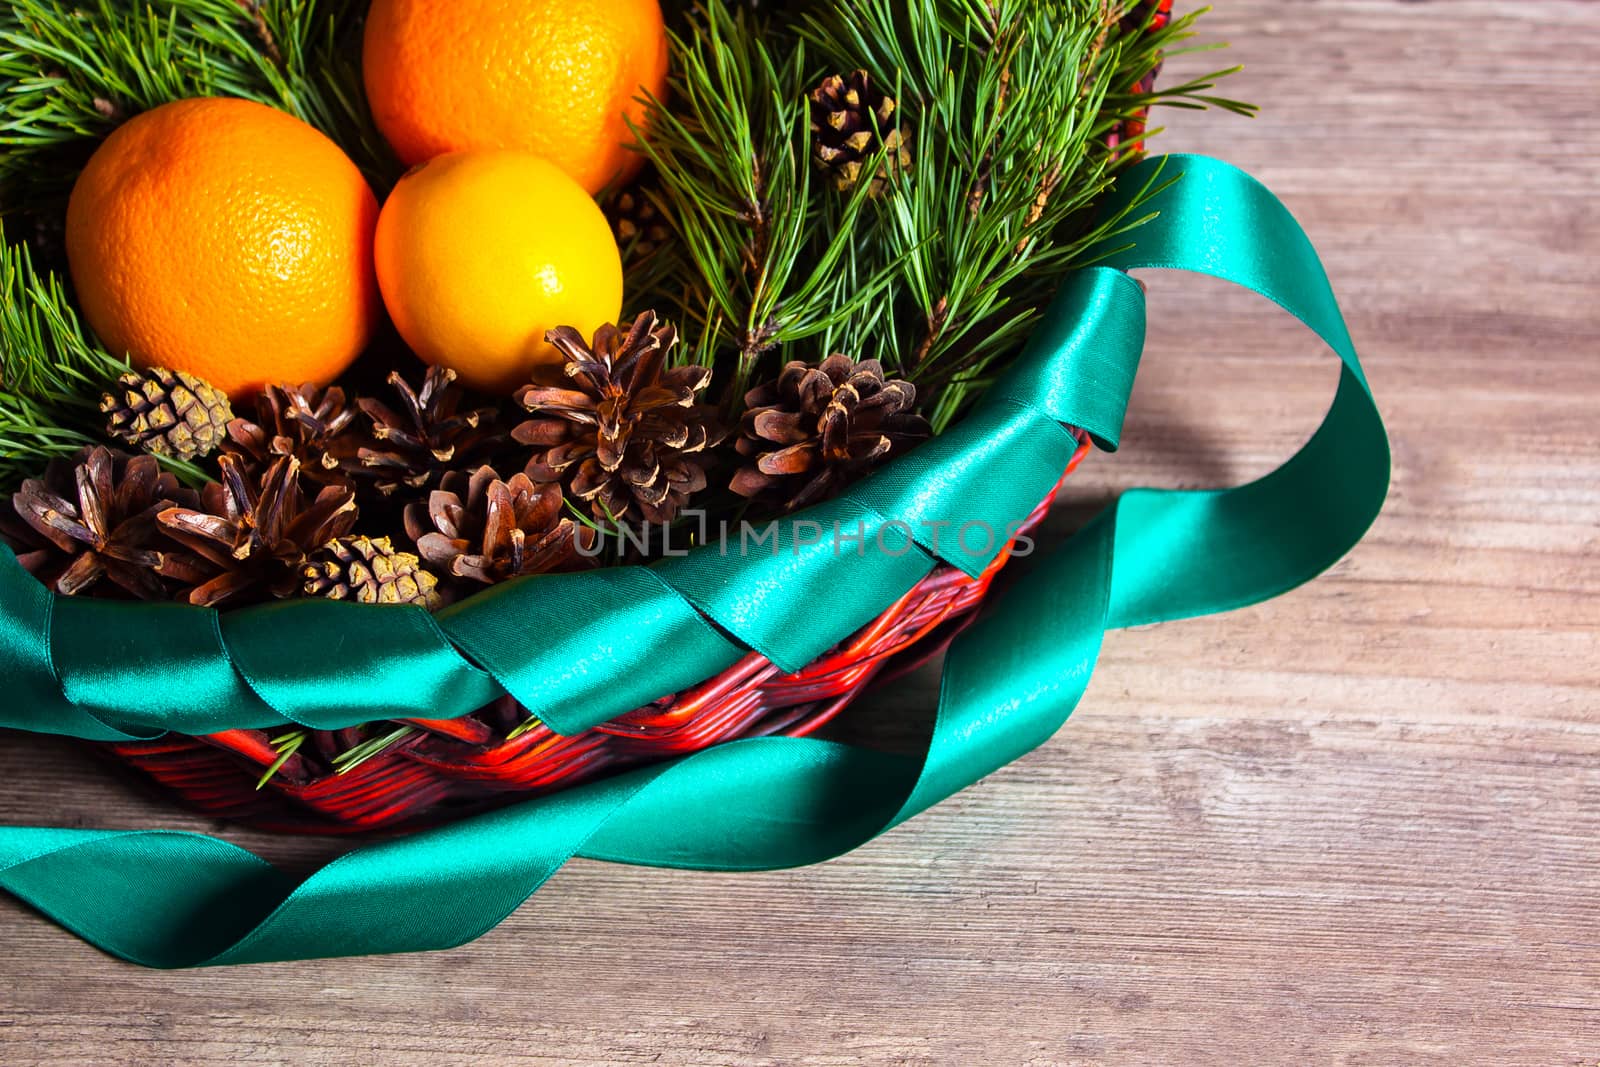 Christmas or new year  fruit basket top view. Oranges and lemon lie in a basket with a Christmas tree and Christmas cones. New year flat lay